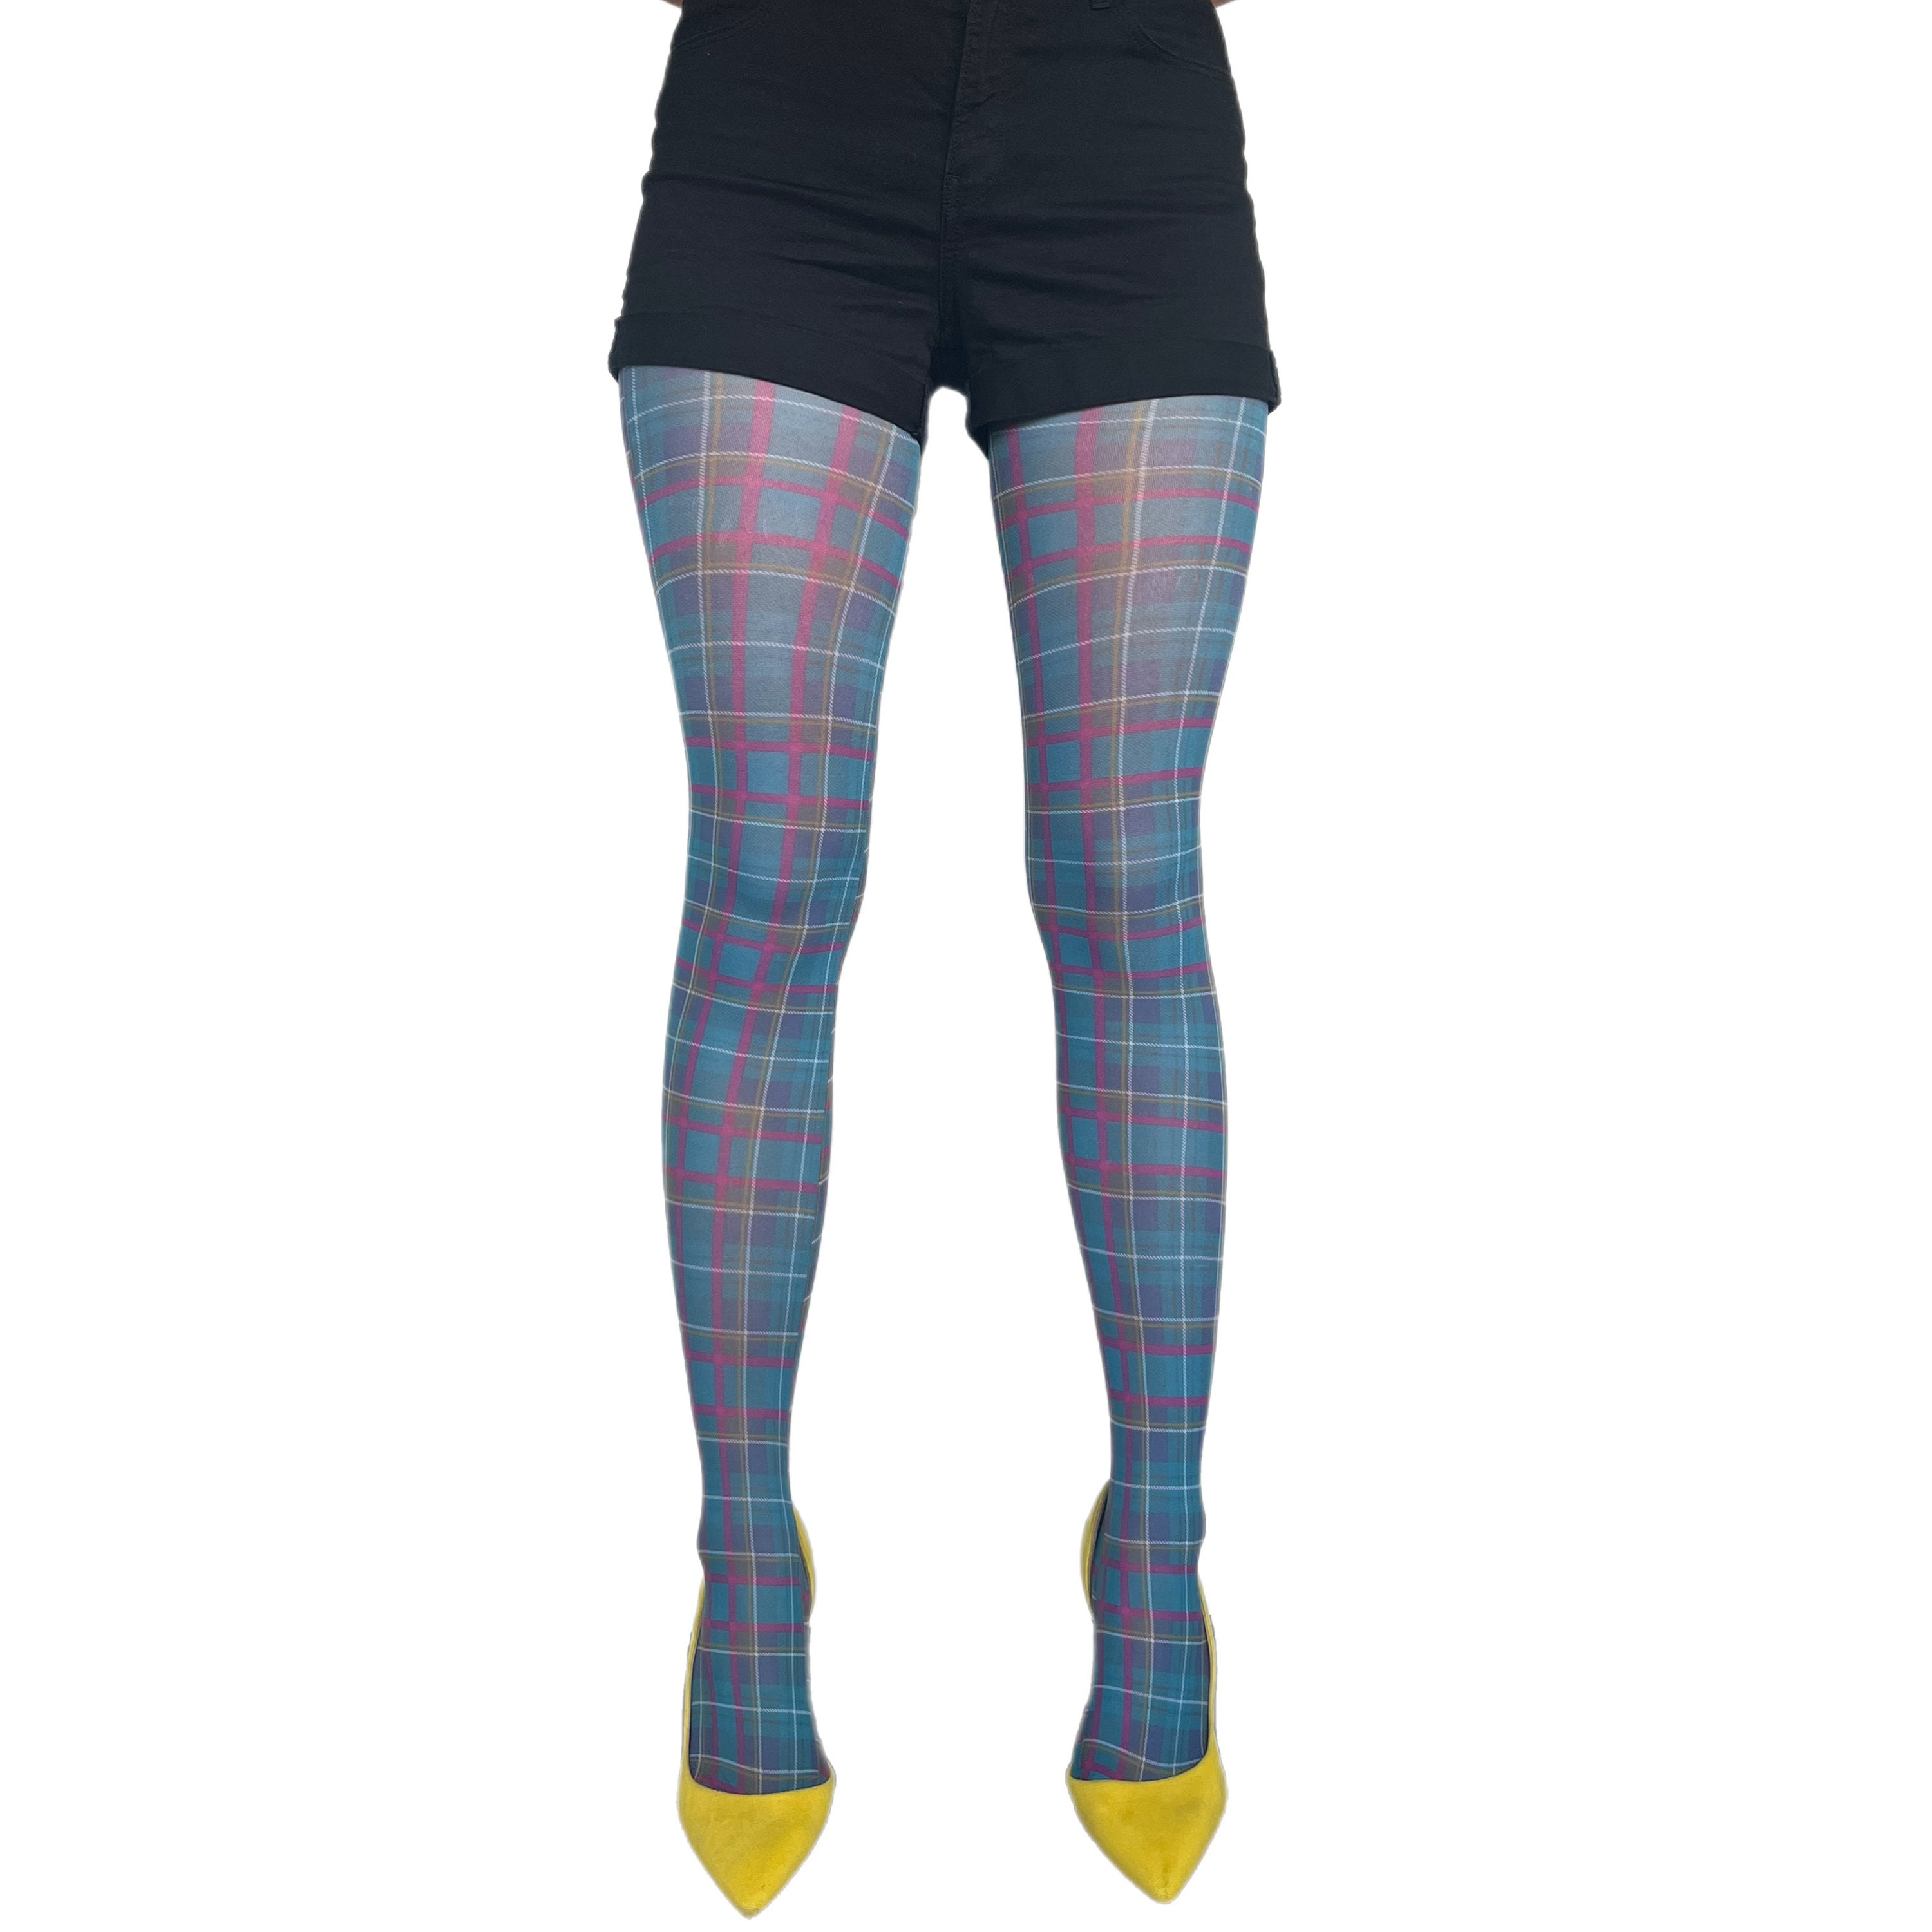 Teal Plaid Patterned Tights for Women 